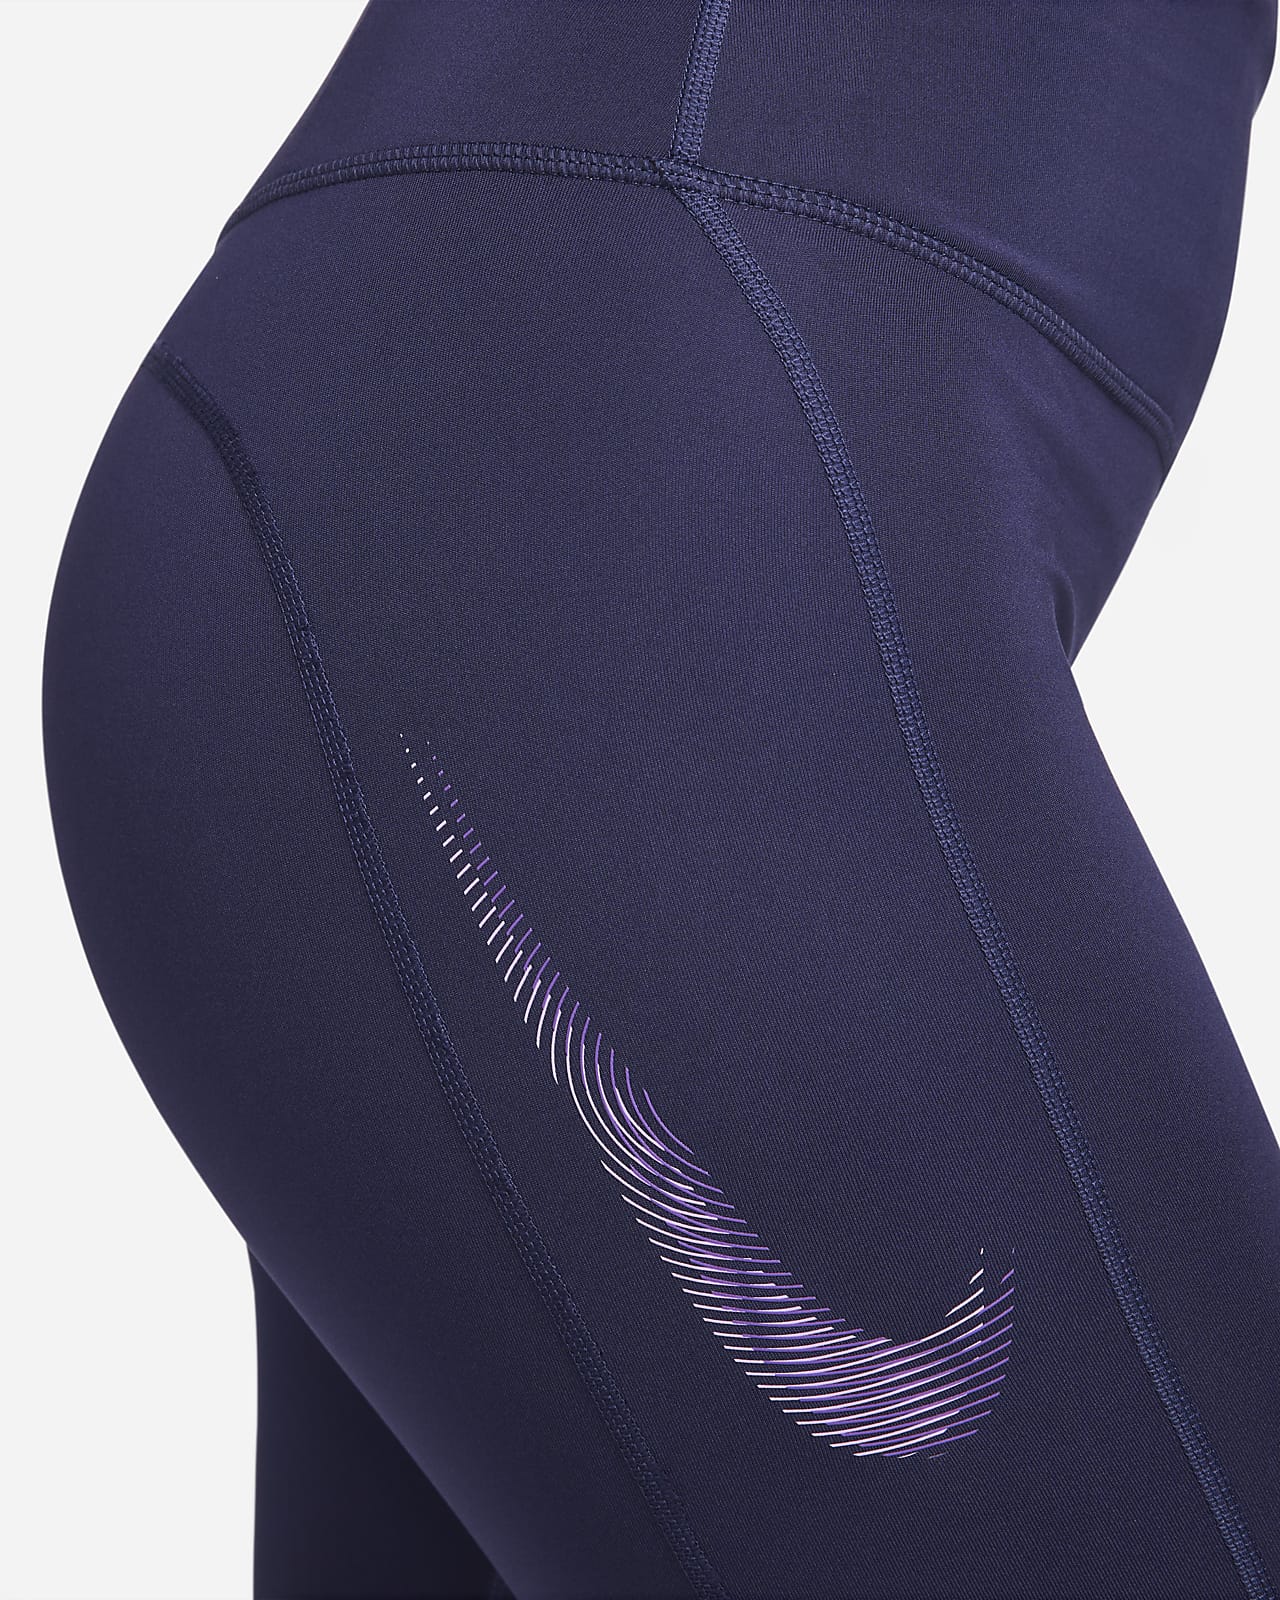 Nike Fast Women's Mid-Rise 7/8 Graphic Leggings with Pockets.